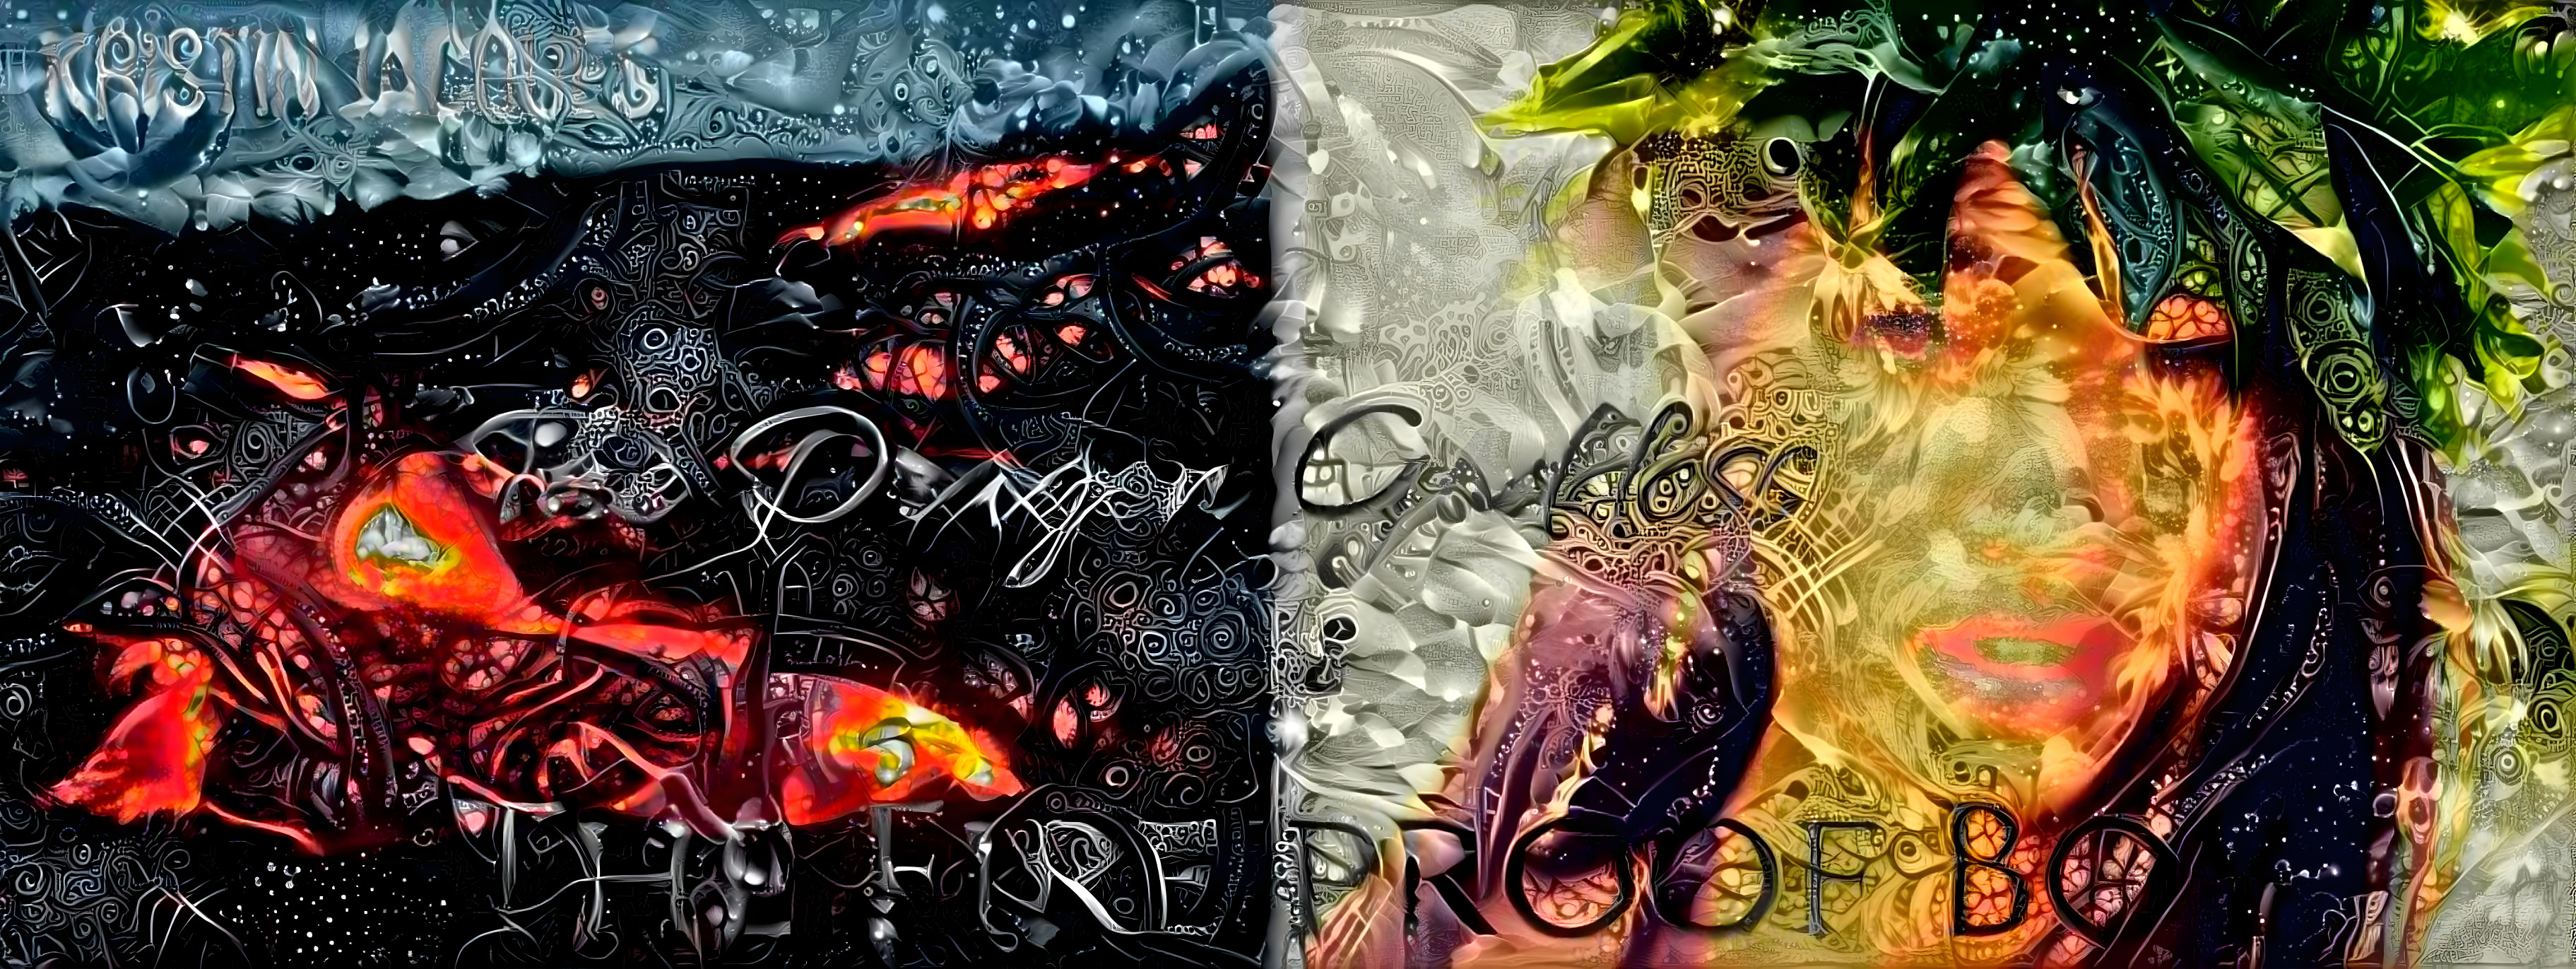 Of Goddesses and Dragons